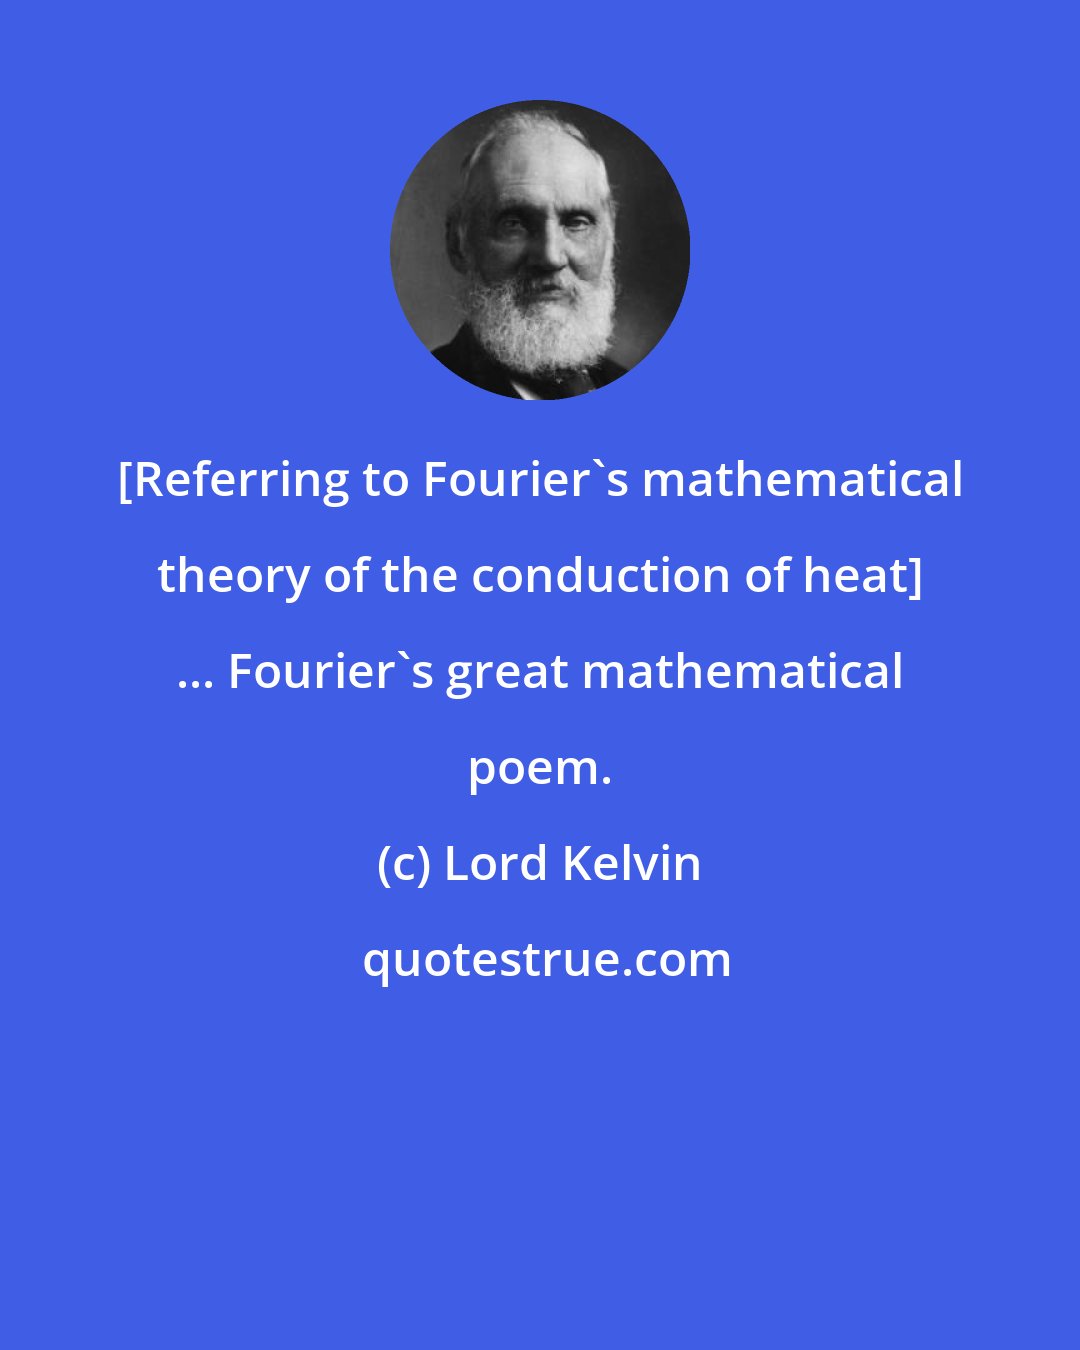 Lord Kelvin: [Referring to Fourier's mathematical theory of the conduction of heat] ... Fourier's great mathematical poem.